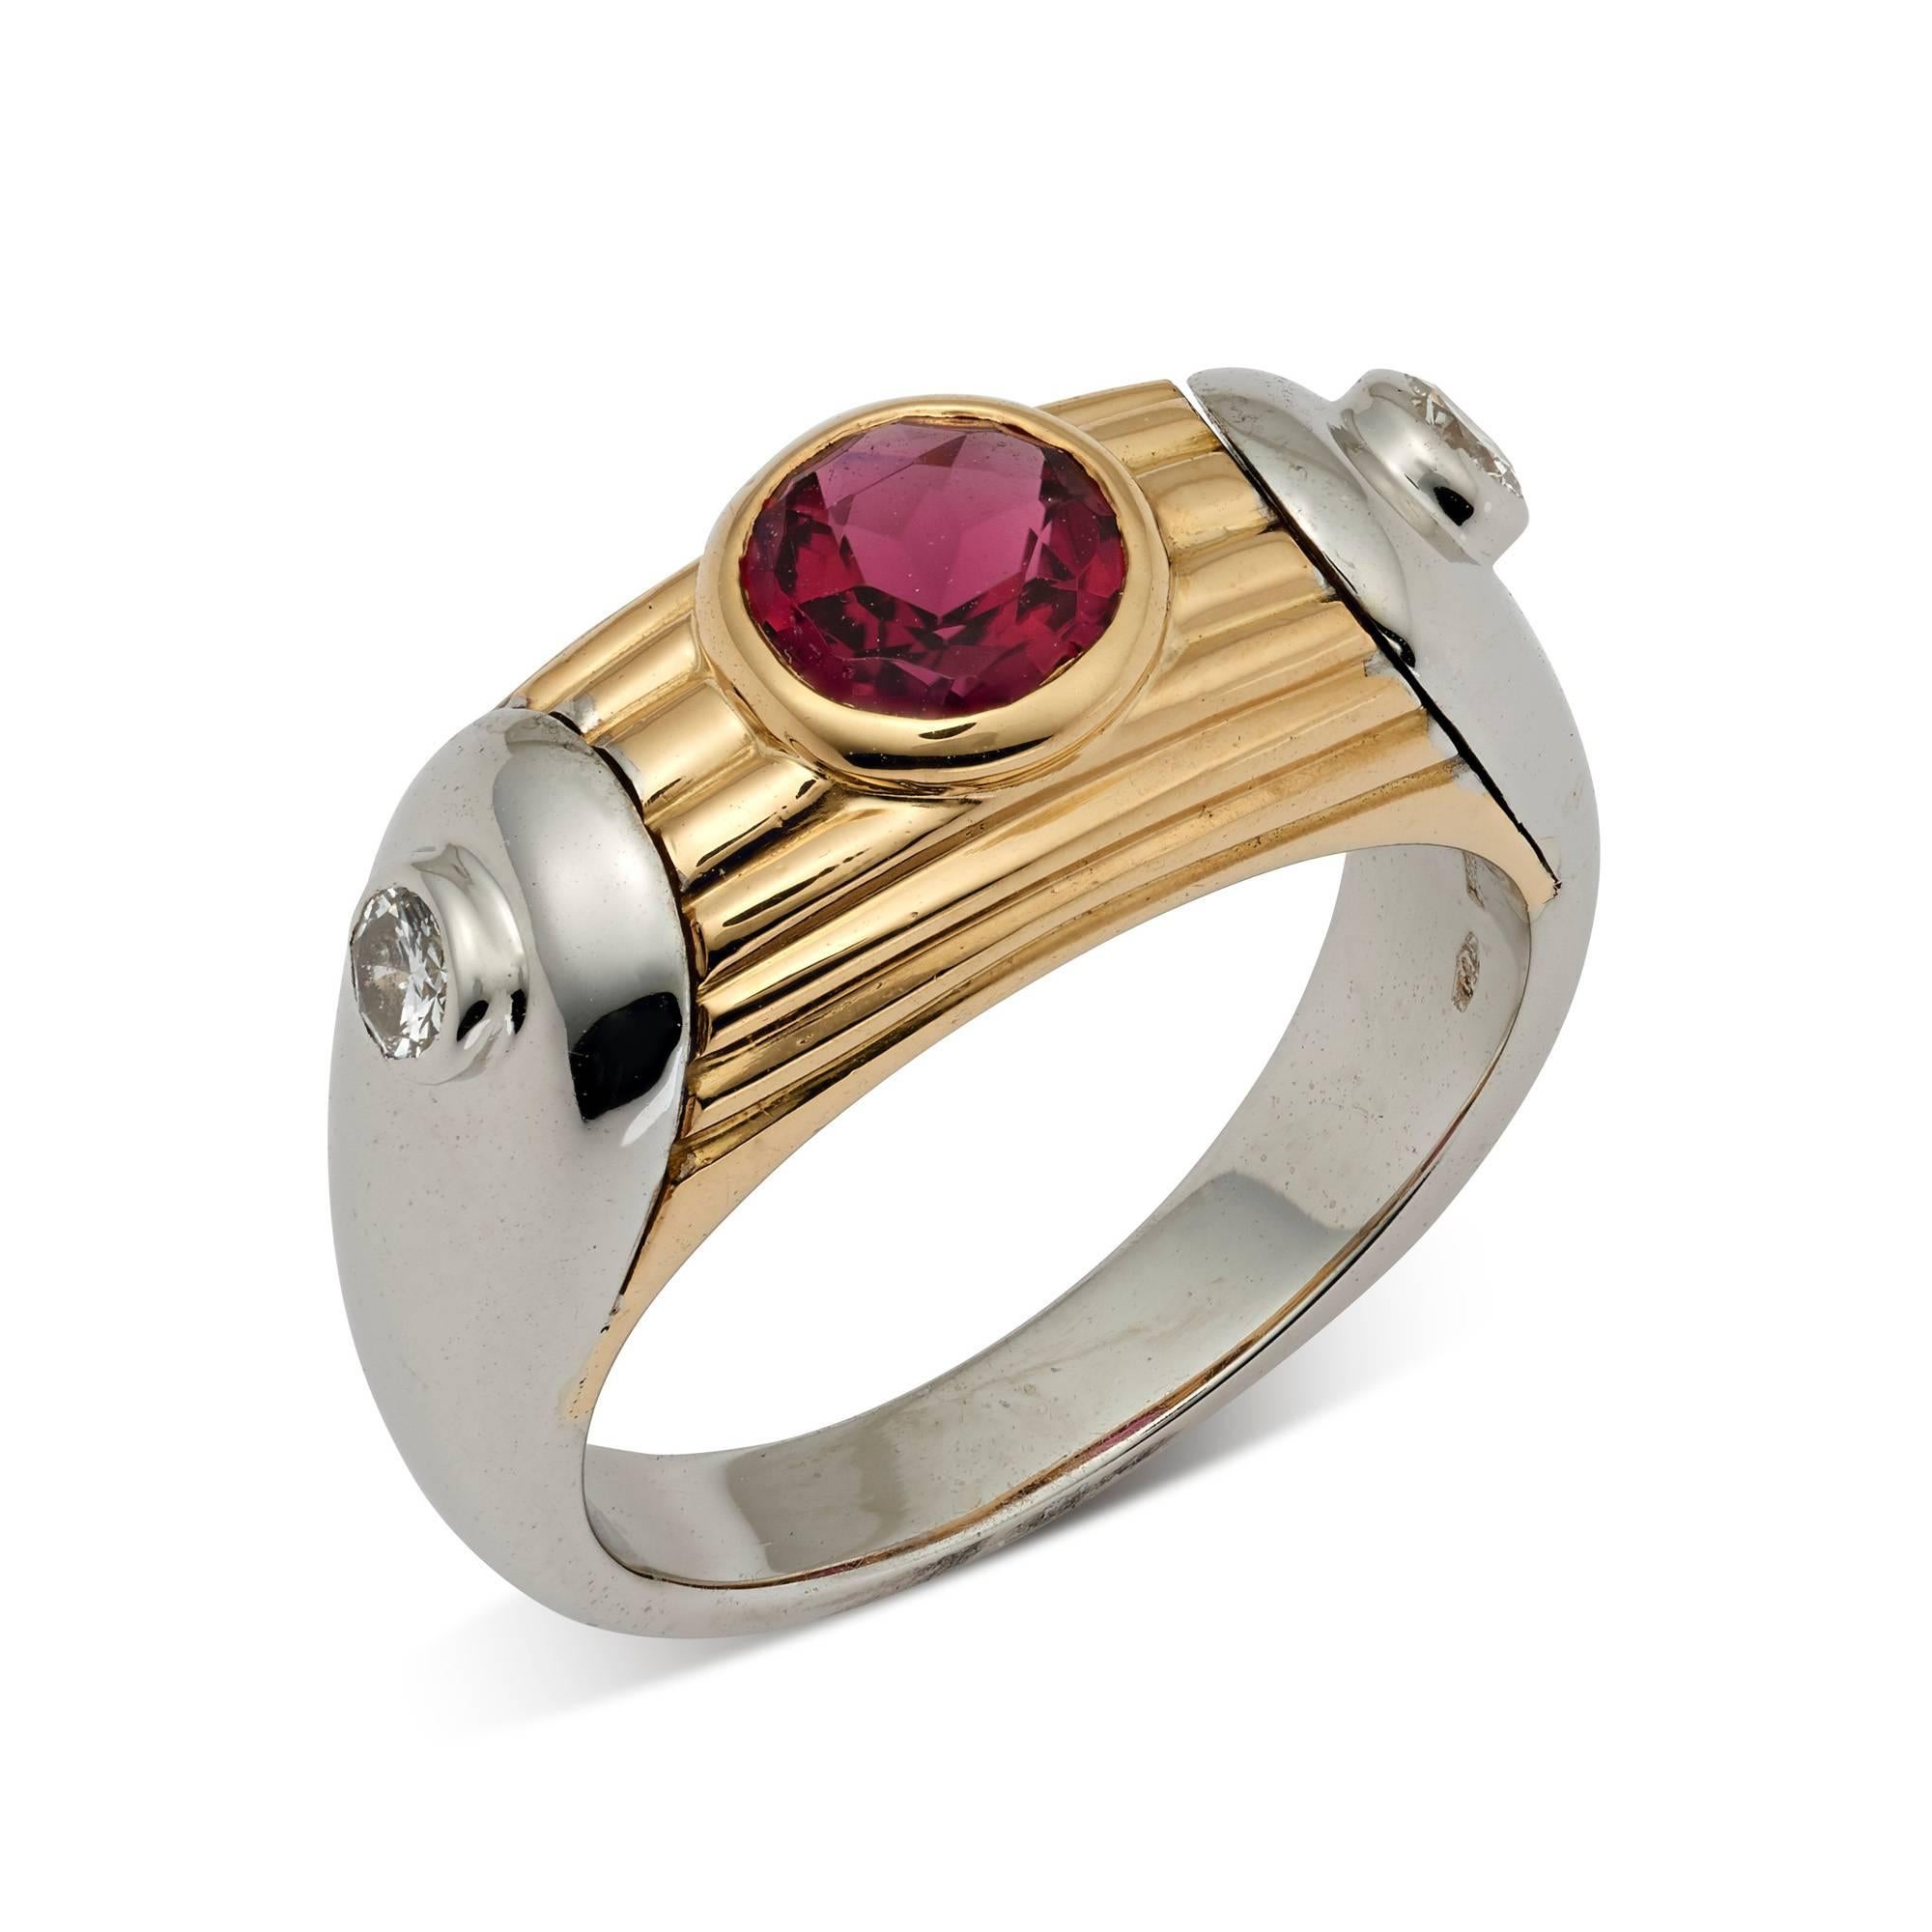 A very chic pink tourmaline and diamond ring set in 18ct yellow and white gold, signed and numbered by Bvlgari

Finger size L - Can be adjusted slightly

Diameter of pink tourmaline 5.5mm